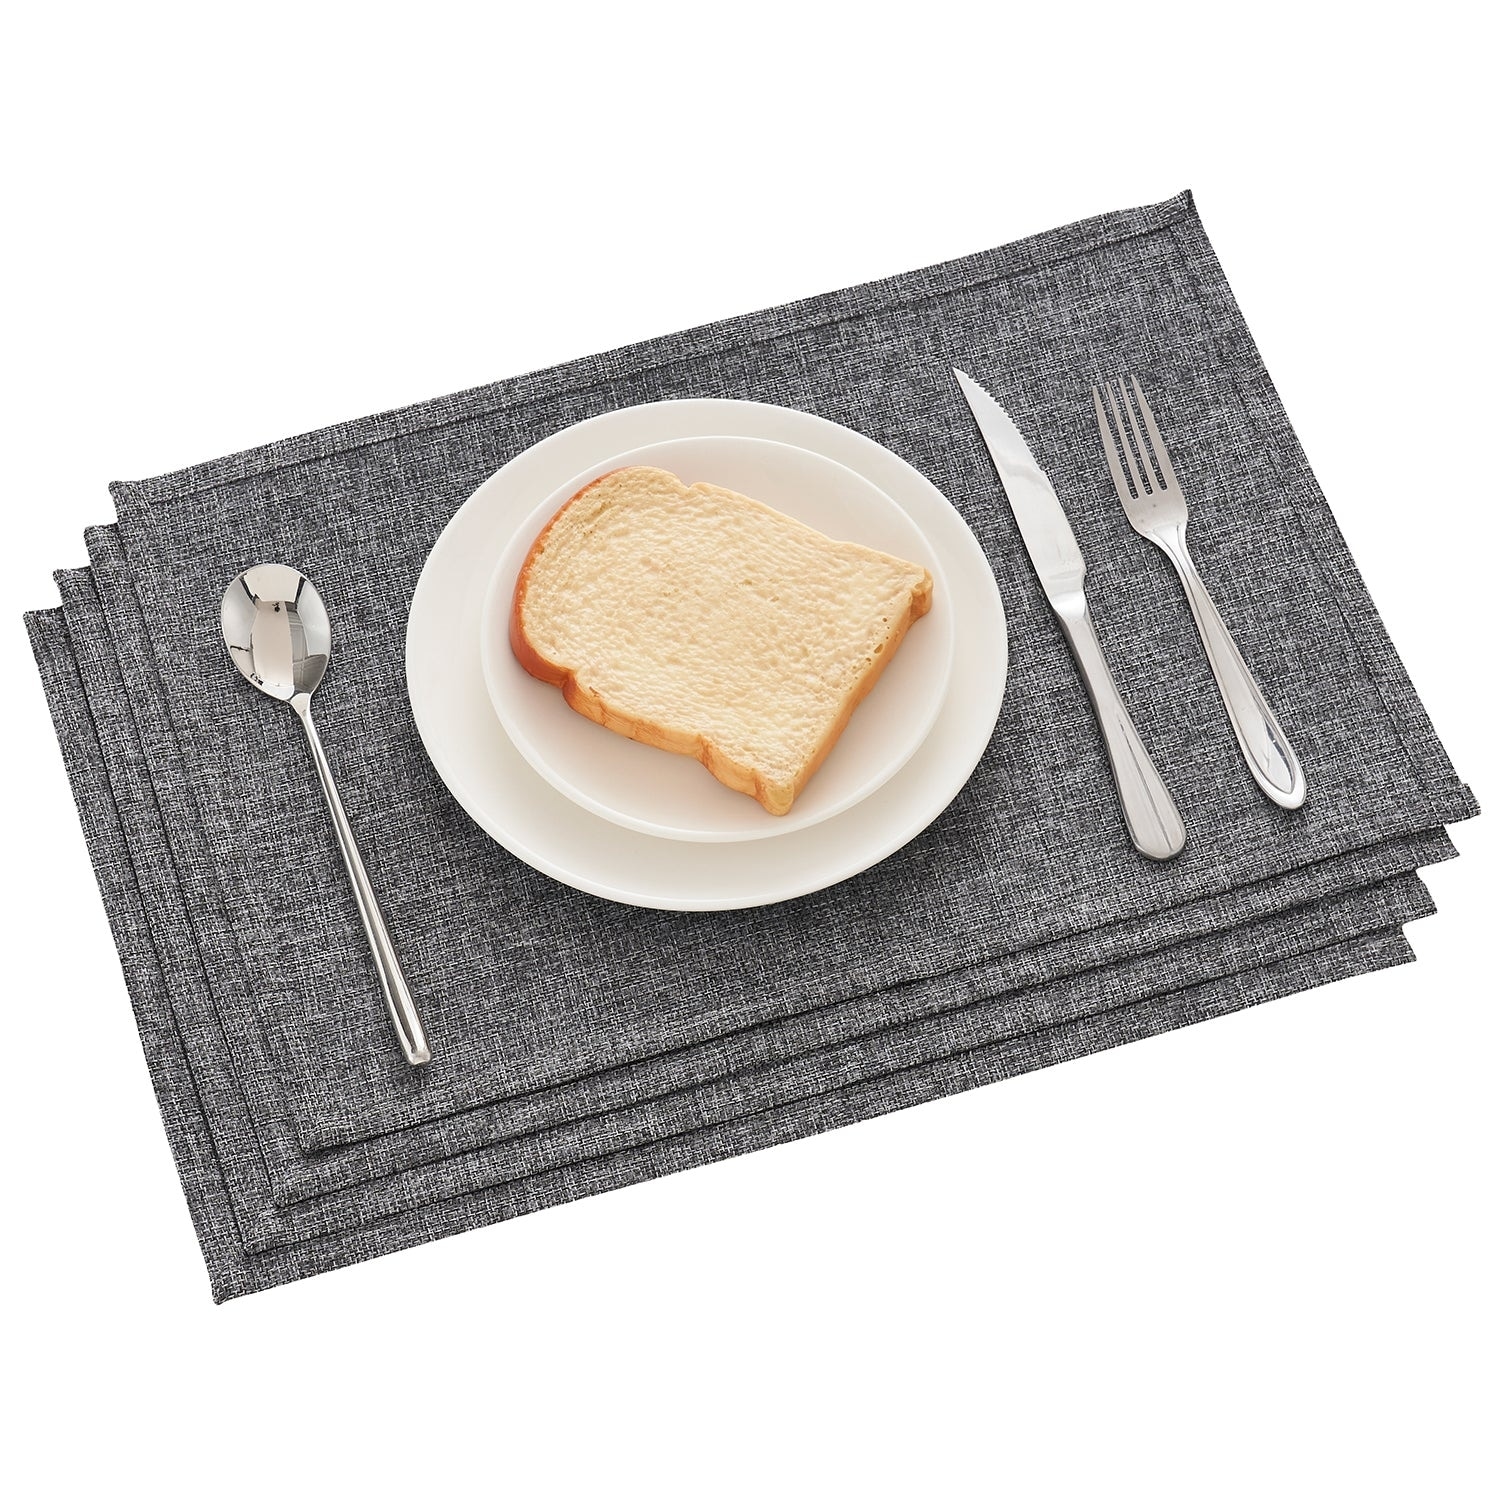 https://ak1.ostkcdn.com/images/products/is/images/direct/ddb0e5e22ffc82626dc989ea8f5a9236f3657ee5/Linen-Placemats-Set-of-4%2C-Heat-Resistant-Dining-Table-Place-Mats-%2C-Machine-Washable.jpg